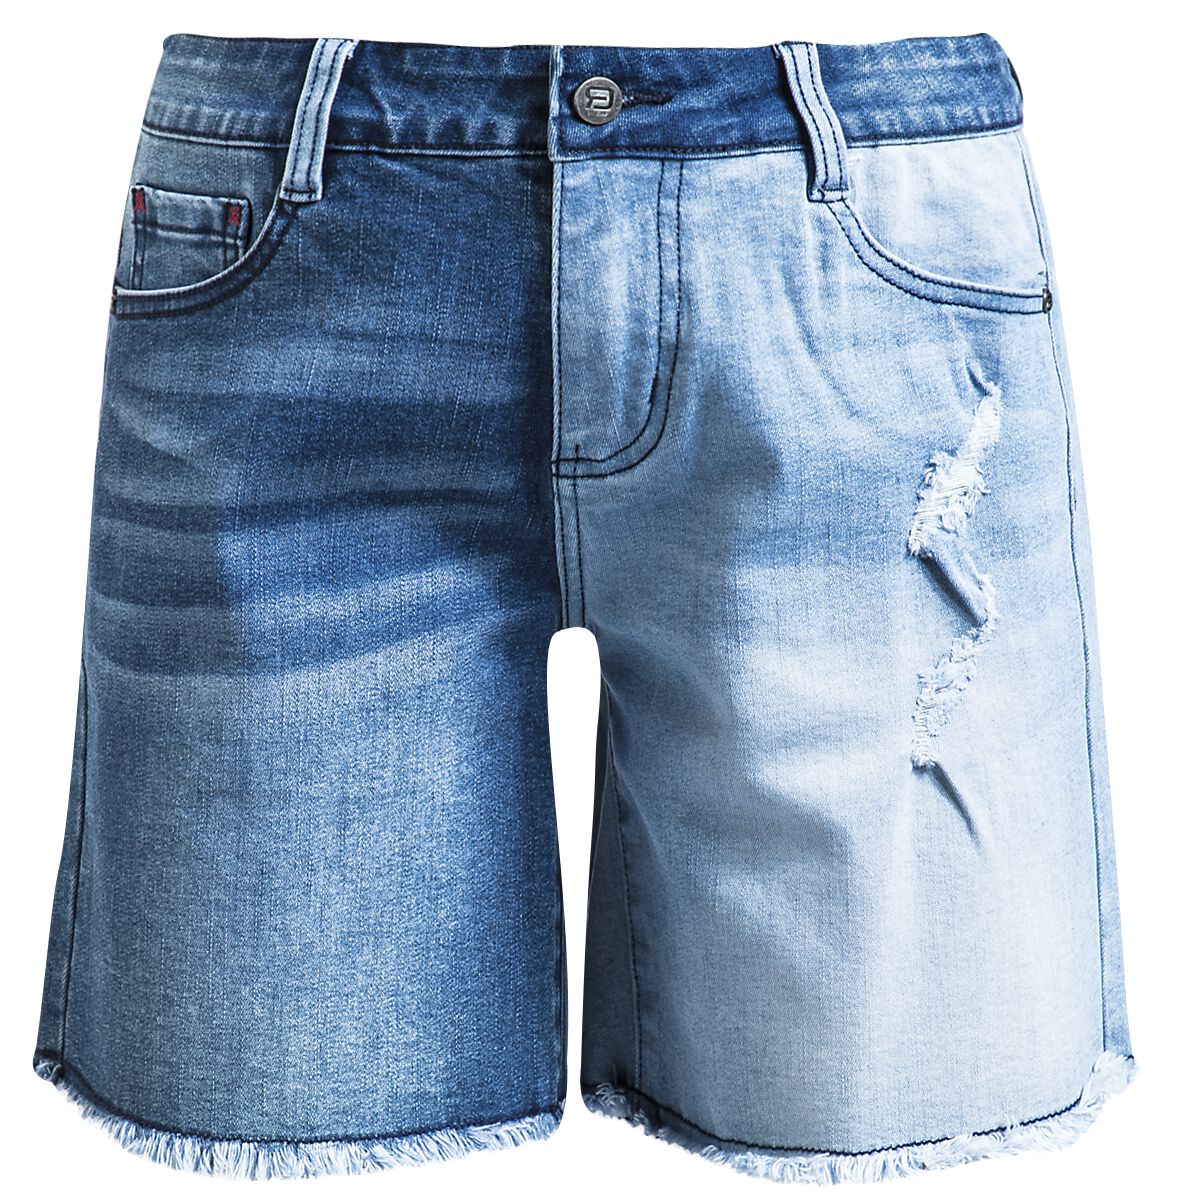 Image of Shorts di RED by EMP - Denim shorts with distressed detailing - 27 a 31 - Donna - blu